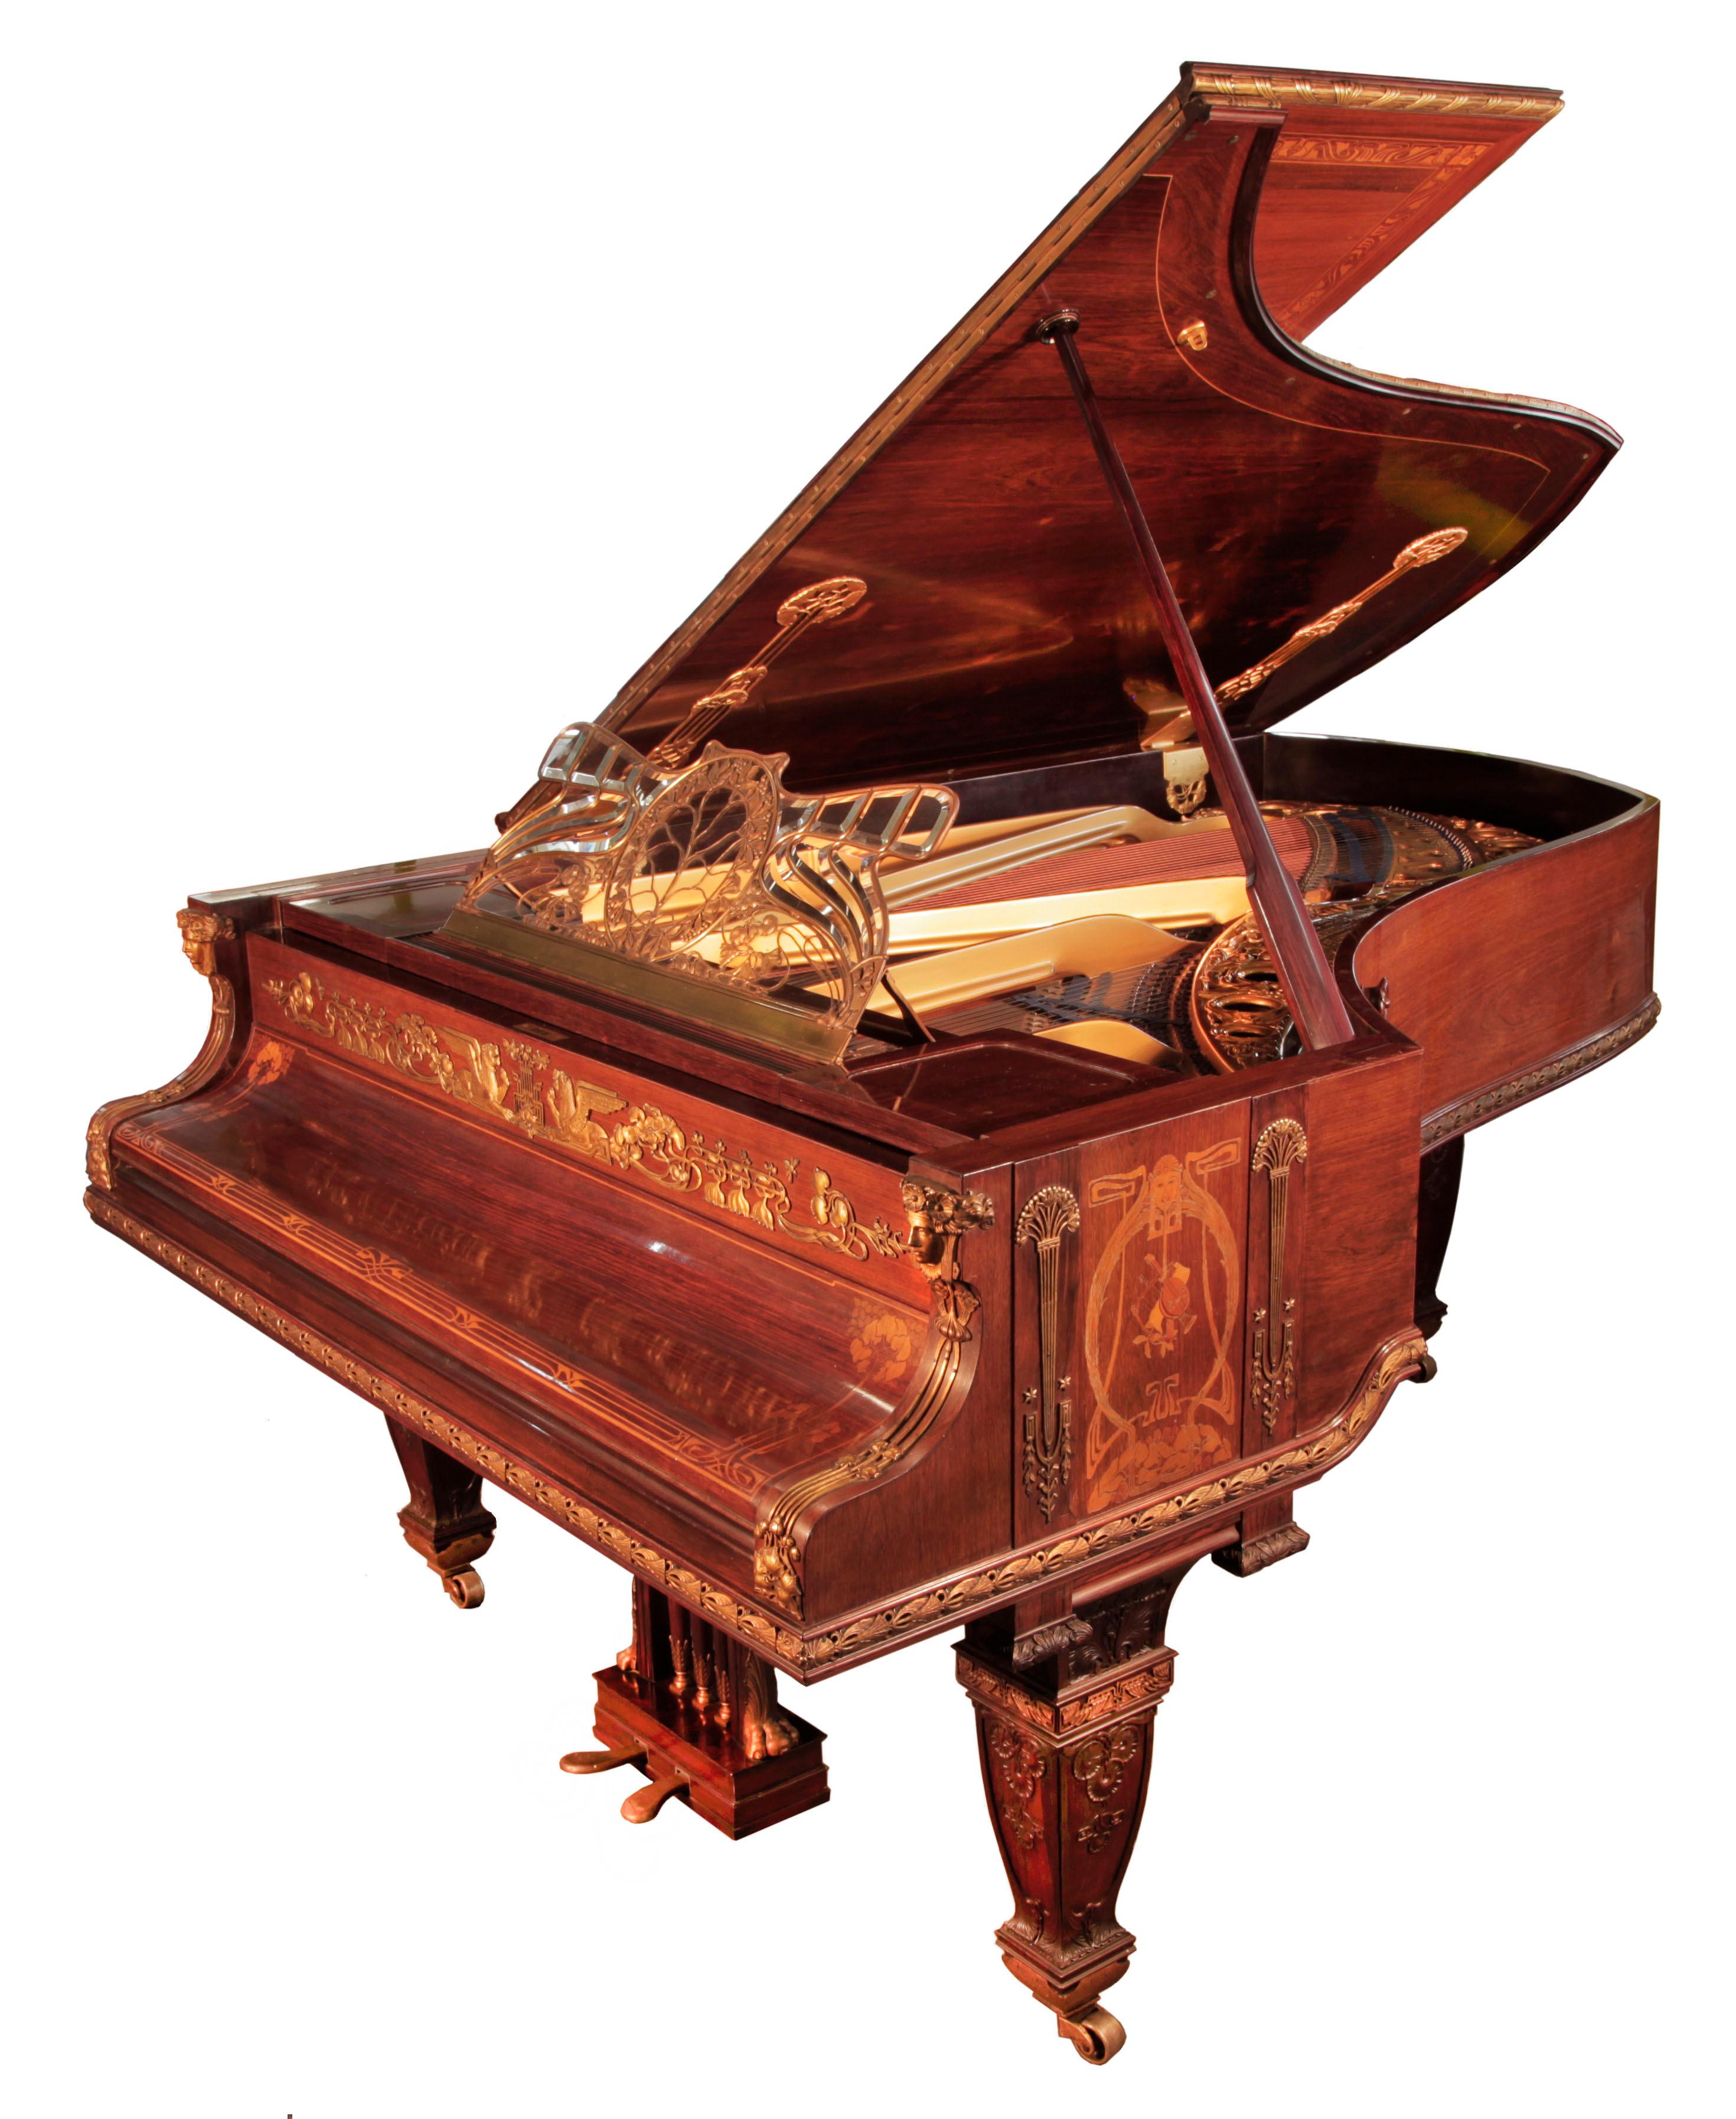 An 1899, Bluthner grand piano with a rosewood case, decorated with Art Nouveau and Empire style elements. It was showcased at the 1900 Paris Exposition Universelle. Piano bought by King Edward VII and Queen Alexandra in the Coronation year of 1902